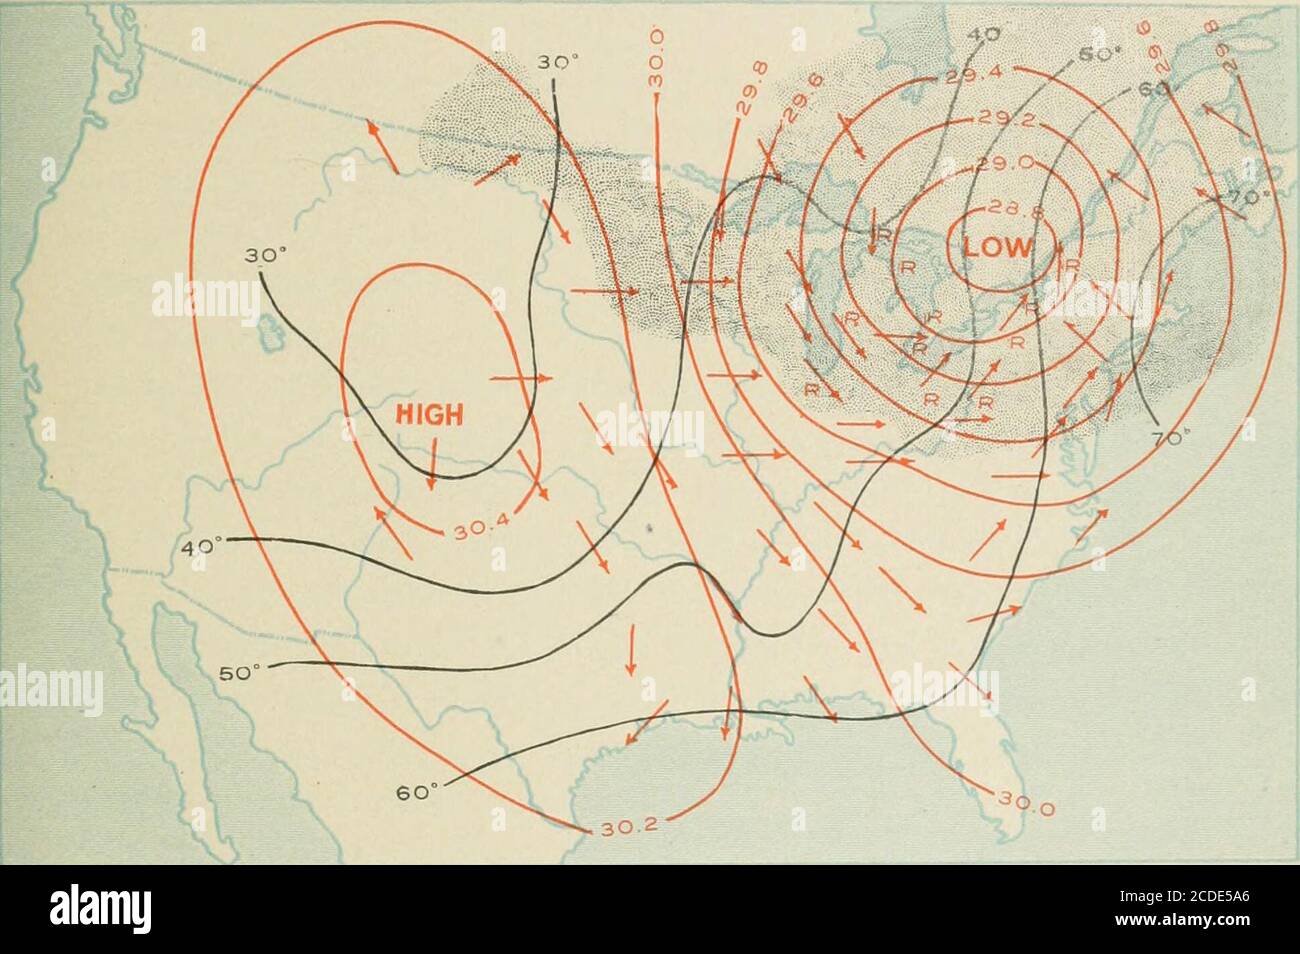 . The climate and weather of Baltimore . Fig. 167.—The Hurricane of October 13, 1893 (8 p. m.), MARYLAND AVEATIIER SERVICE 479 (8 p. m. Oct. 13 Station Velocity. Direc- ^^°°- (Miles) tion. Charleston, S. C 34 W Washington, D. C 42 SE Baltimore, Md 40 SE Atlantic City, N. J 44 SE Philadelphia, Pa 56 SE Sandy Hook, N. J 64 SE Boston, Mass 36 E Woods Holl, Mass 44 SE to 8 a. m. Oct. 14.) Station. T^^^7 ^J^ (Miles) tion. Albany, N. Y 48 SE Oswego, N. Y 60 SE Buffalo, N. Y 60 SW Erie, Pa 36 SE Sandusky, 0 36 NW Detroit, Mich 46 W Grand Haven, Mich...36 NW Marquette, Mich 34 NW. Fig. 168.—The Hurric Stock Photo